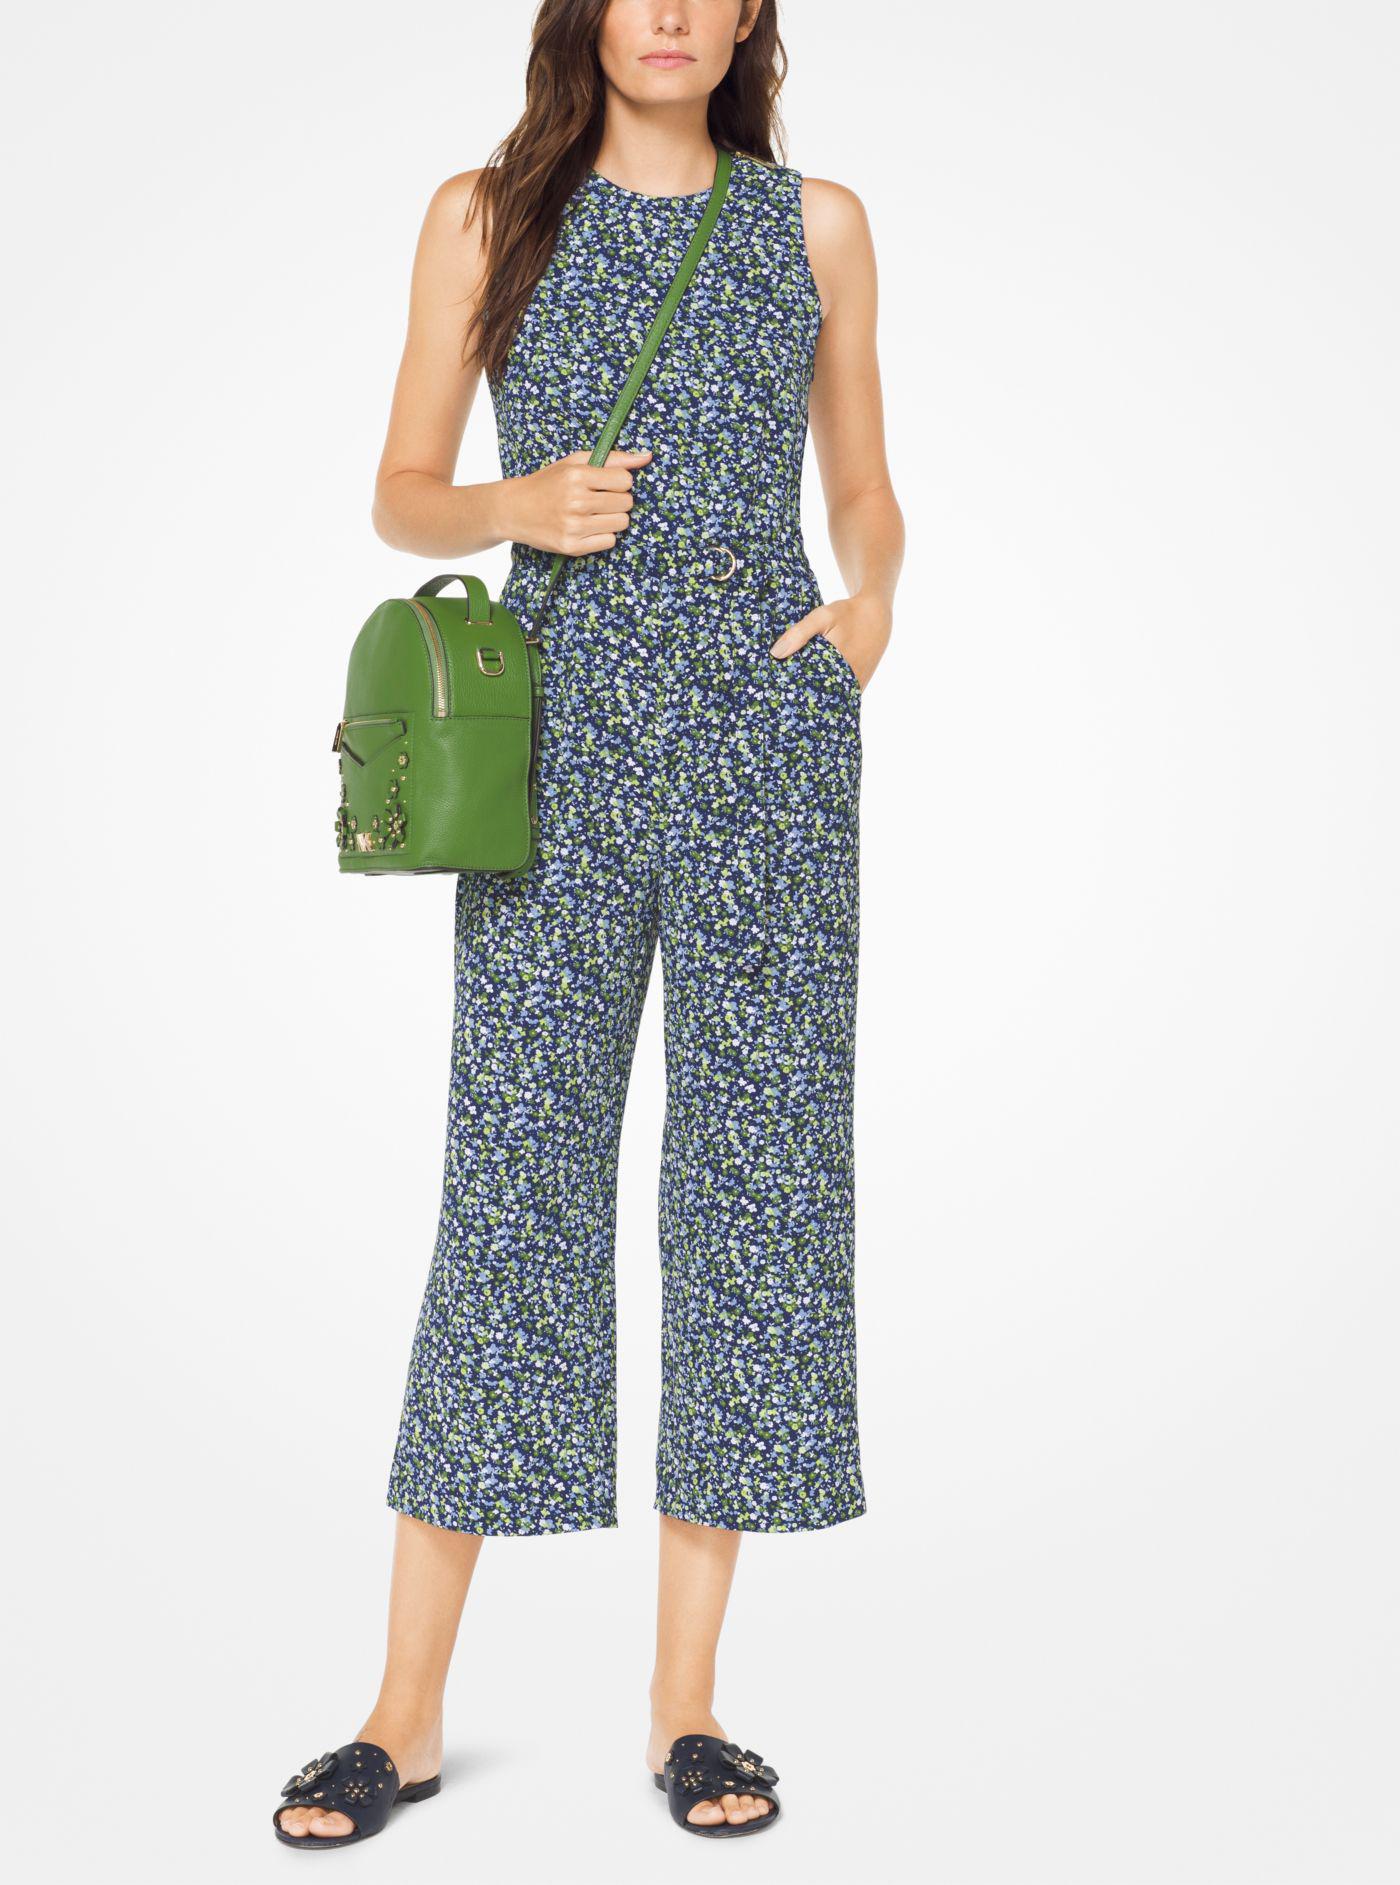 Michael Kors Leather Floral Crepe Belted Jumpsuit in Blue | Lyst